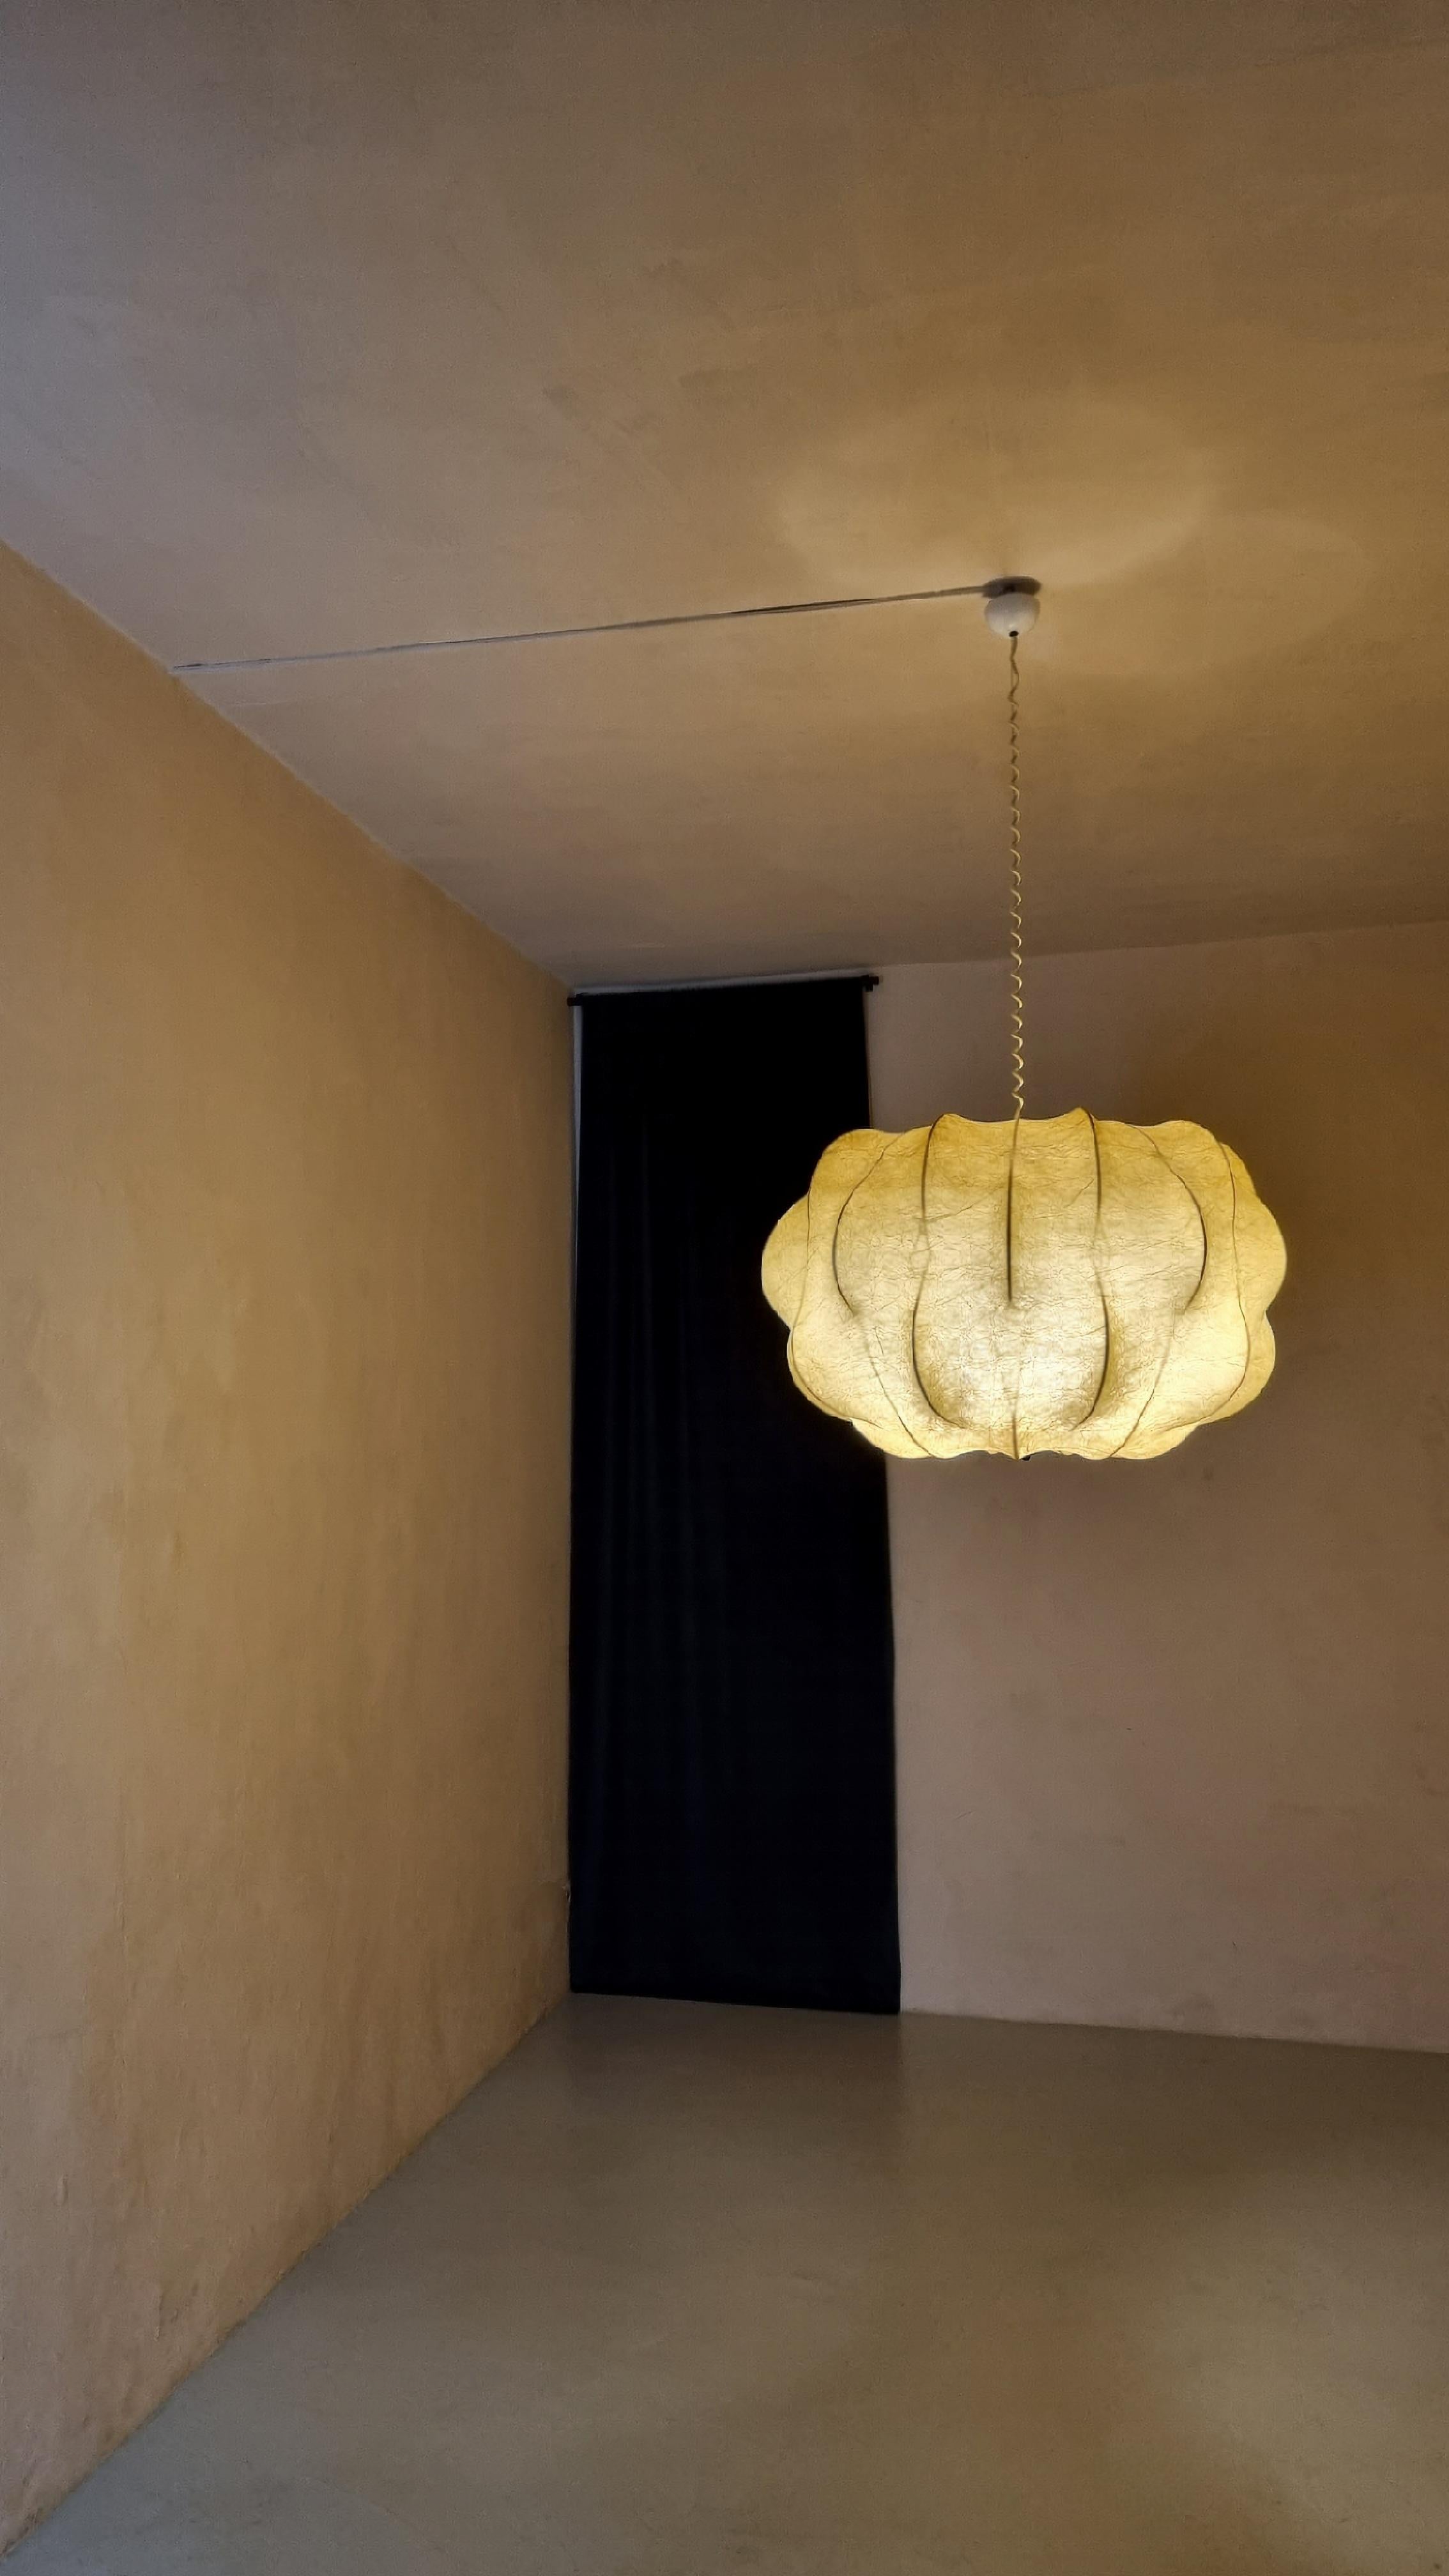 Large Nuvola  Ceiling lamp designed by Tobia Scarpa for Flos, 1963.
White coated internal steel structure, sprayed with special cocoon resin, first edition in excellent condition.
Original piece of the 60s, despite the fragility of the material,